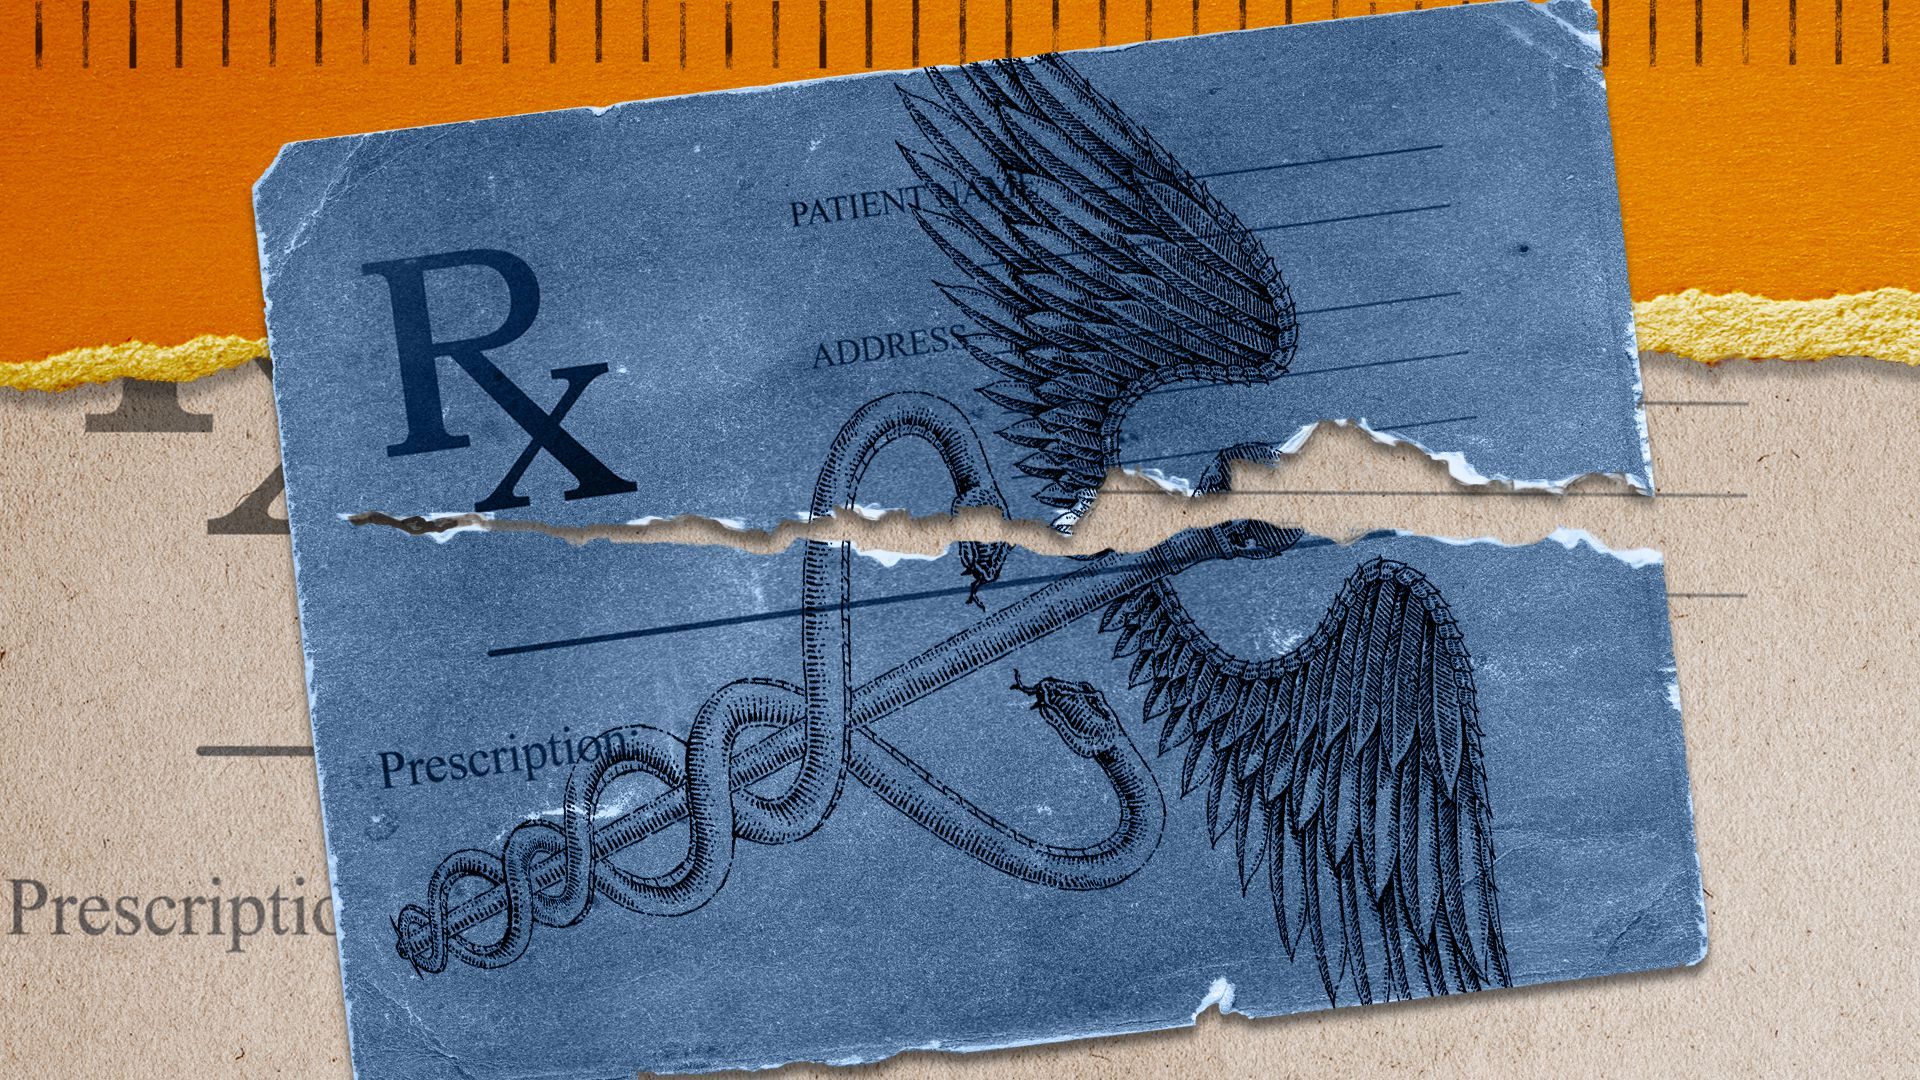 Illustration of a caduceus and a prescription pad on a collage of torn paper